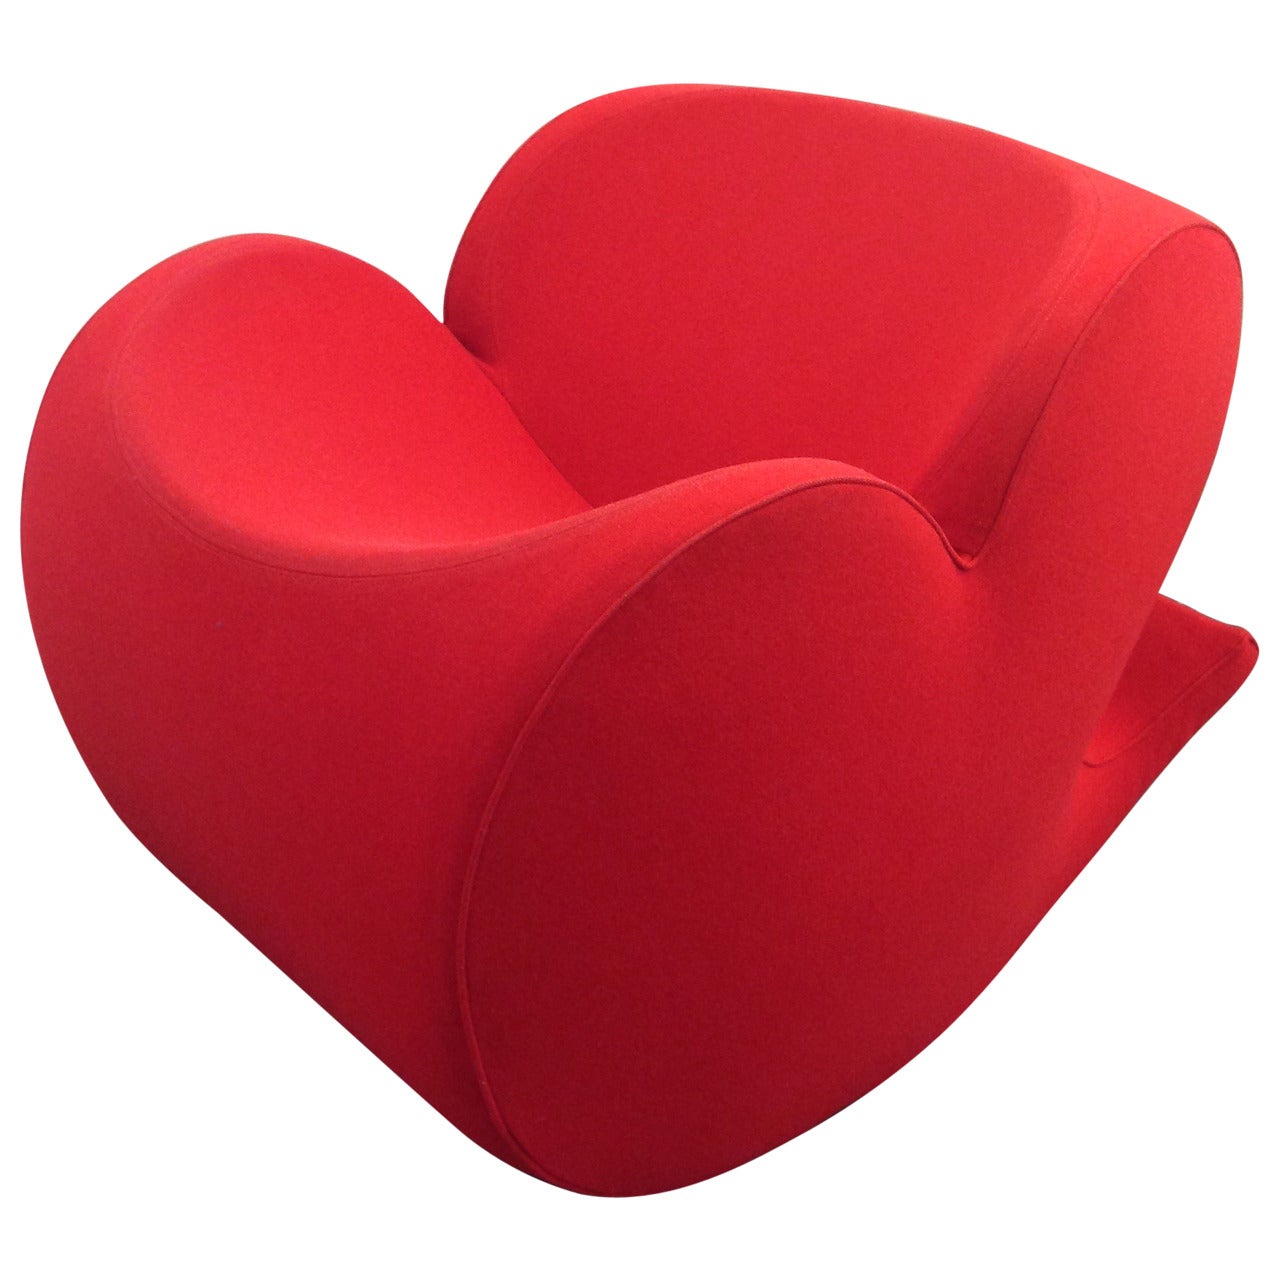 Lovely Soft Heart Rocking Chair by Ron Arad, Moroso in Original Condition For Sale